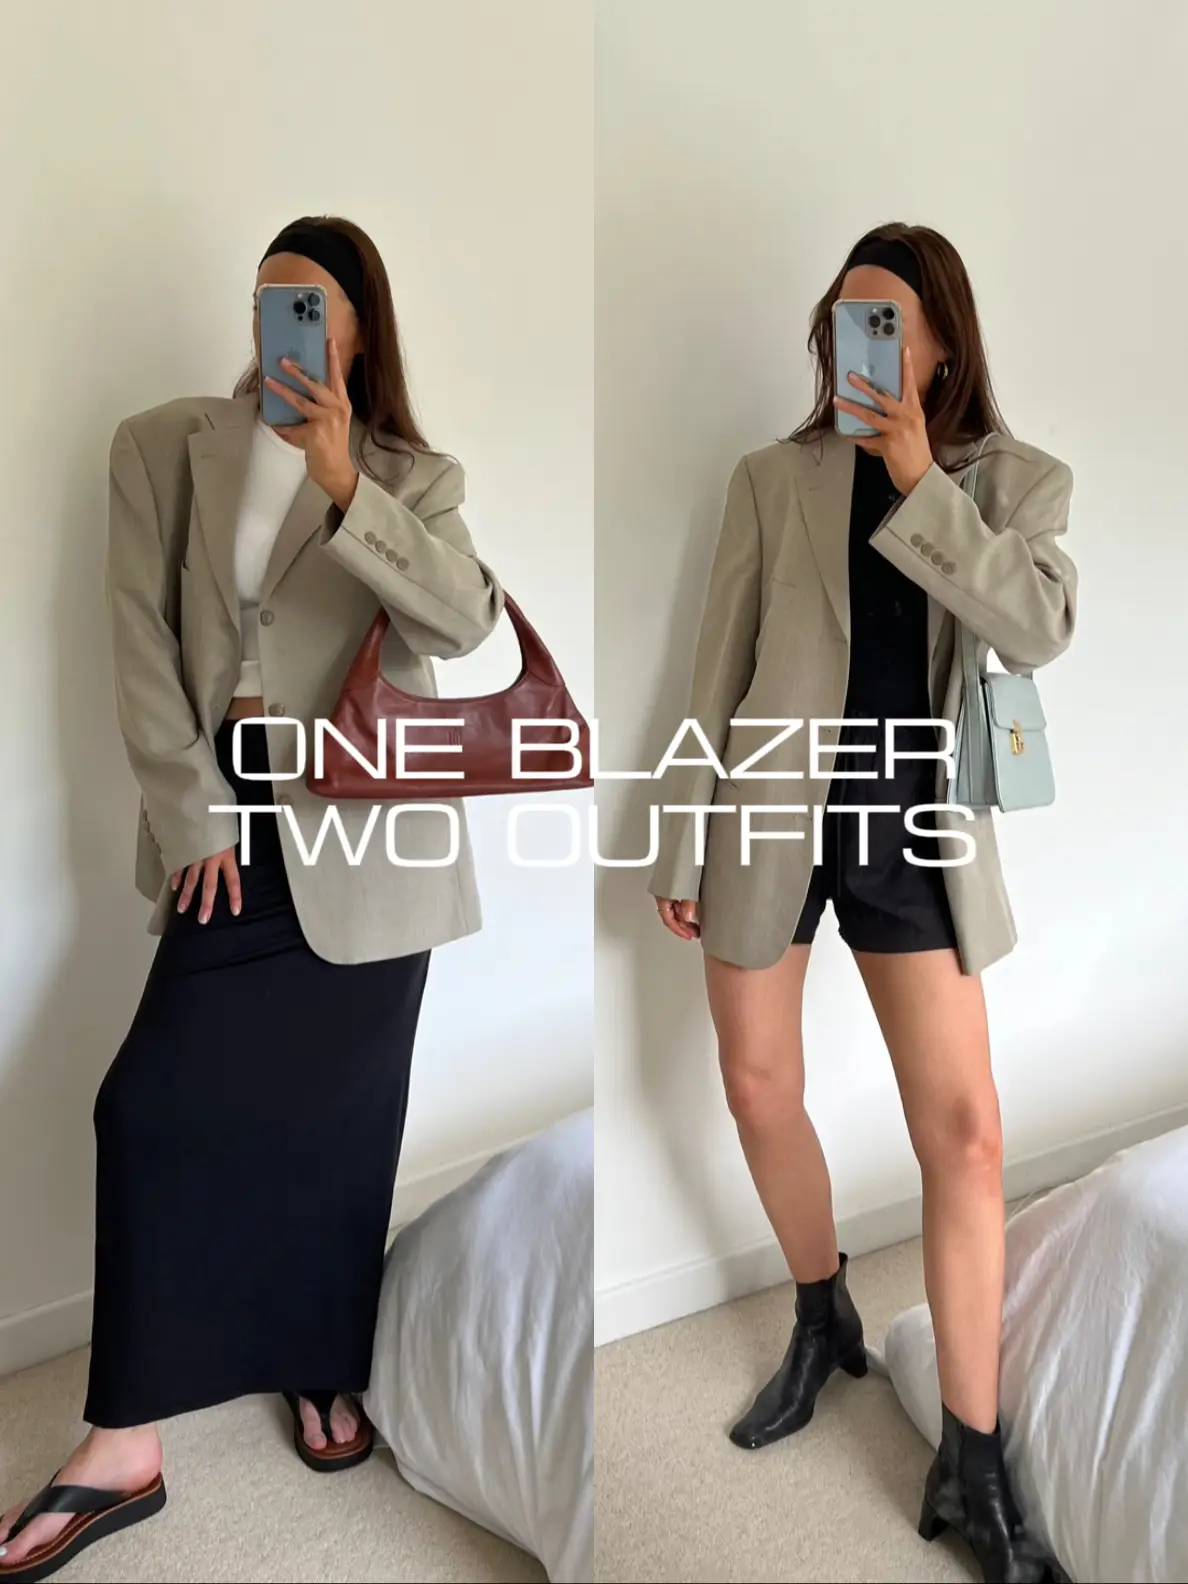 One blazer - two outfits, Gallery posted by Monique Agar